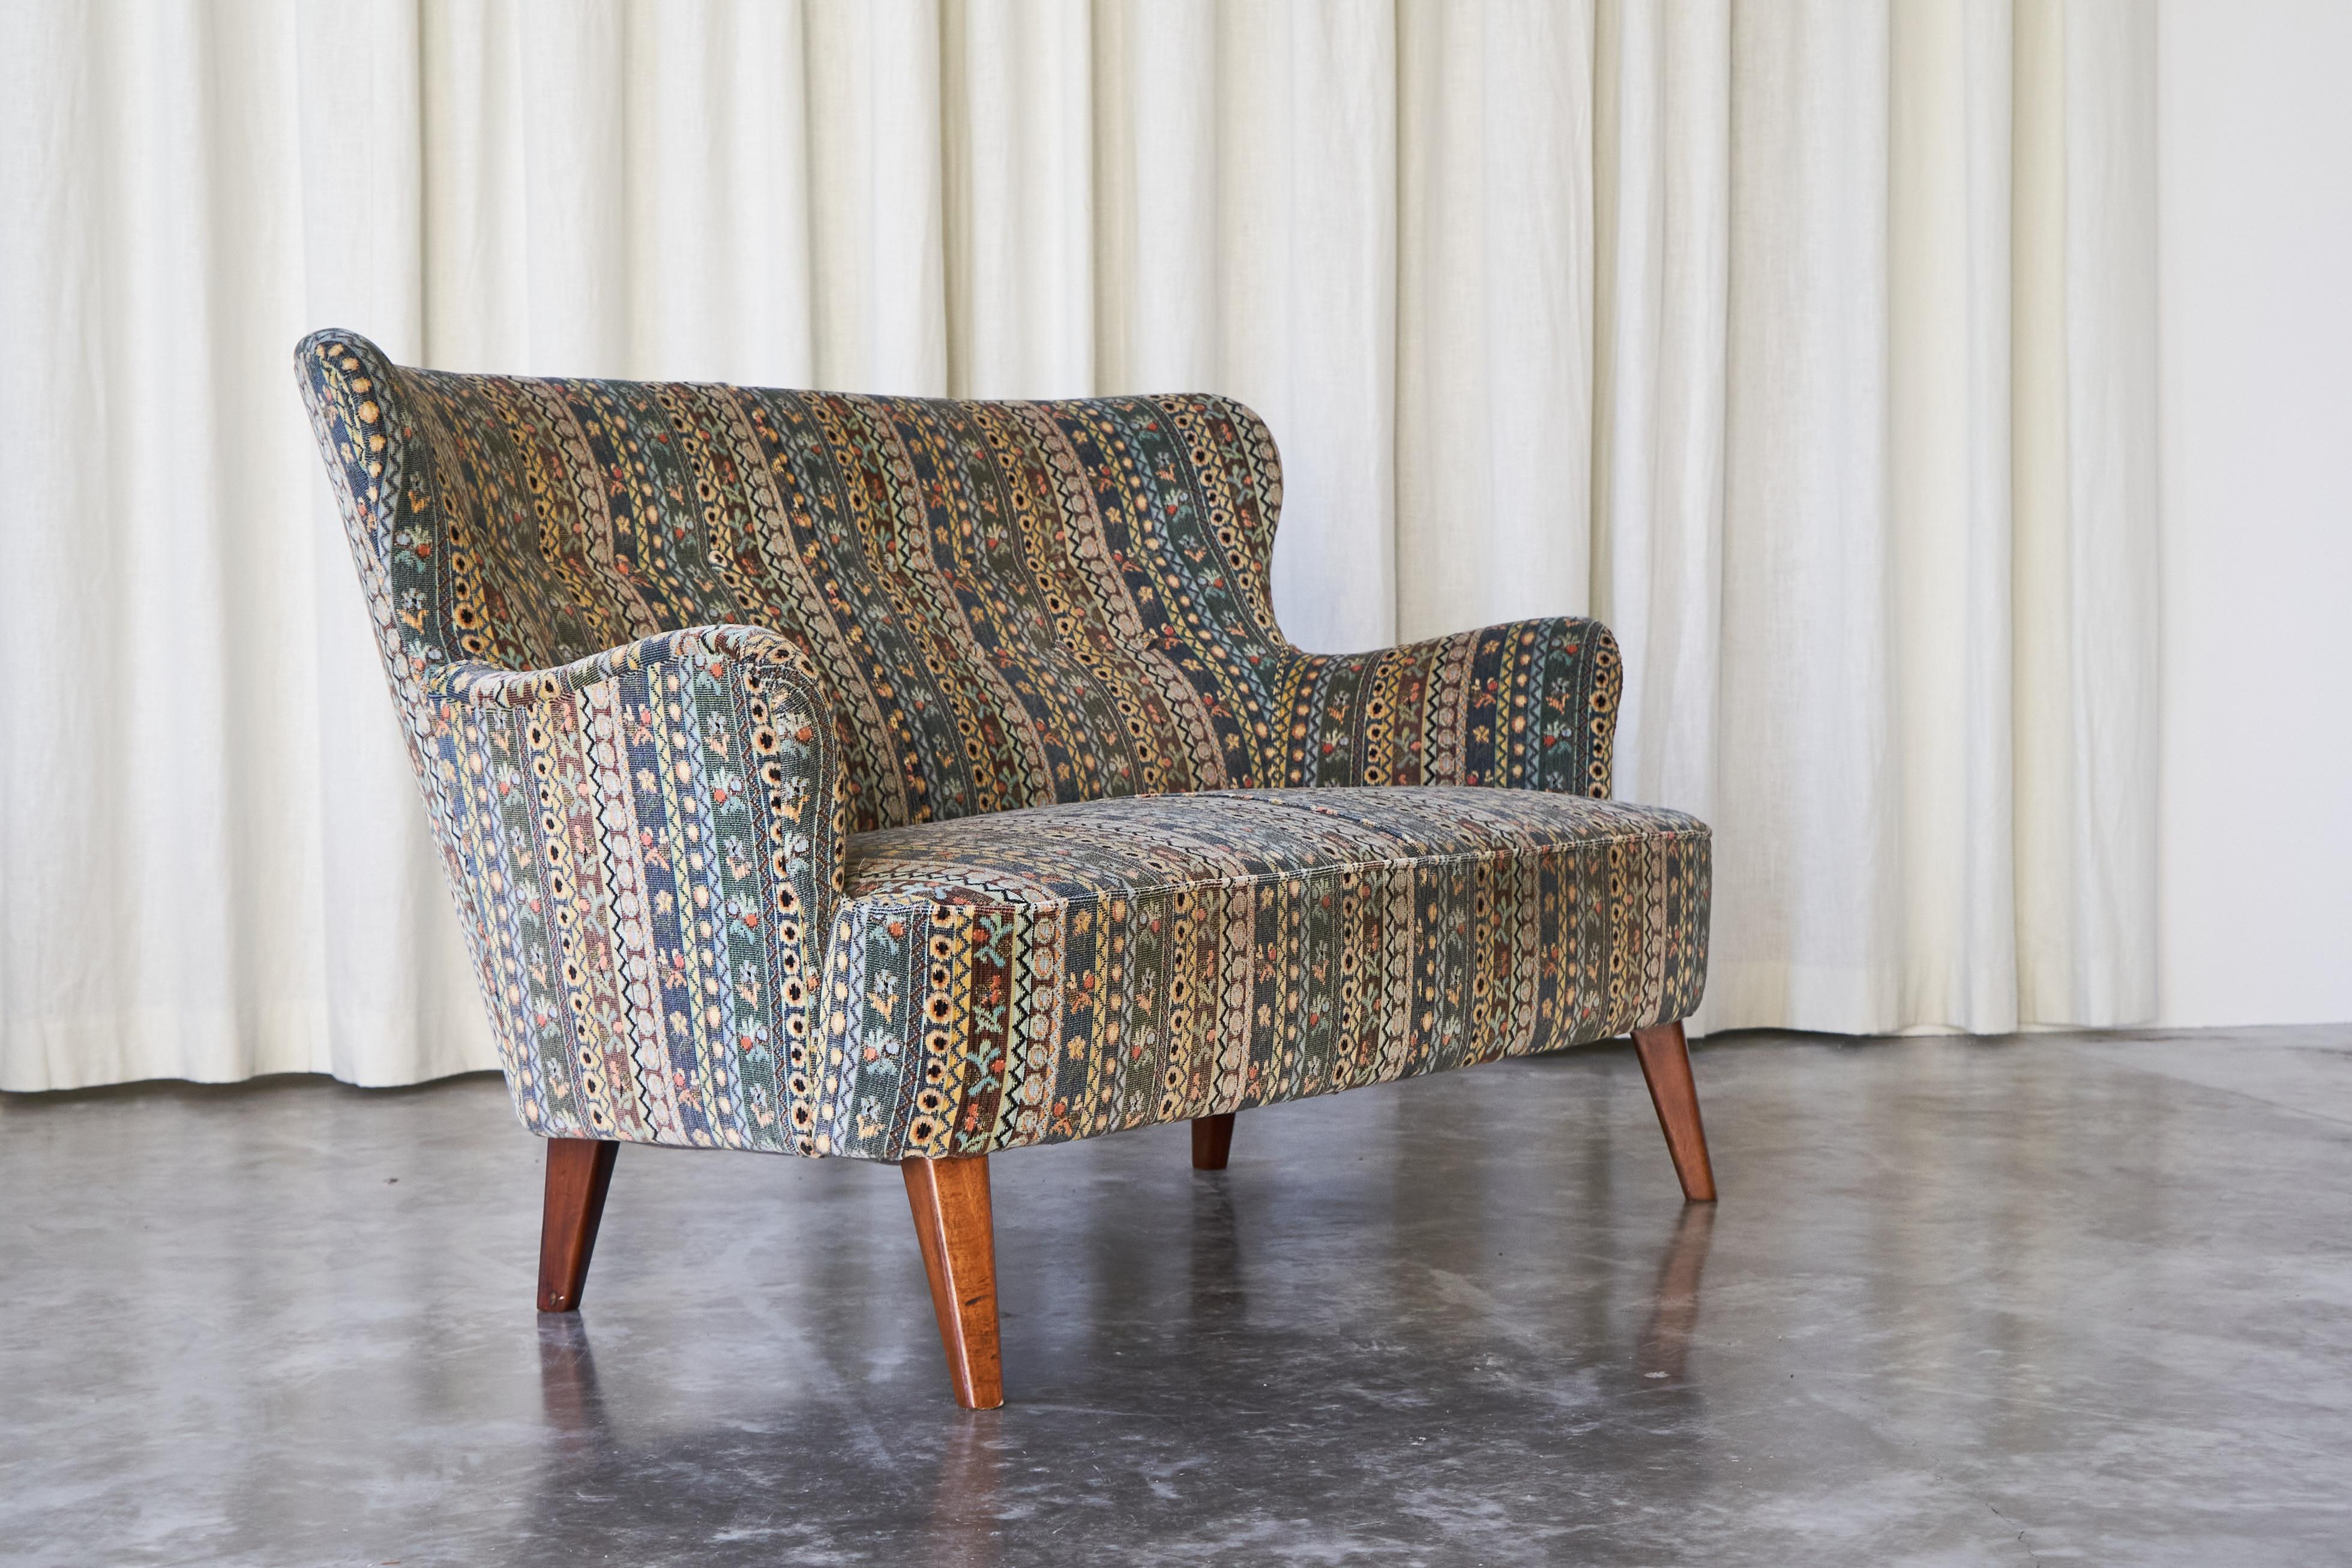 This is a wonderful sofa designed by Theo Ruth for Wagemans & van Tuinen / Artifort, made in 1956. 

The design of this sofa is classic mid-century and Scandinavian in style, but really comes to life due to the fantastic colorful upholstery. This